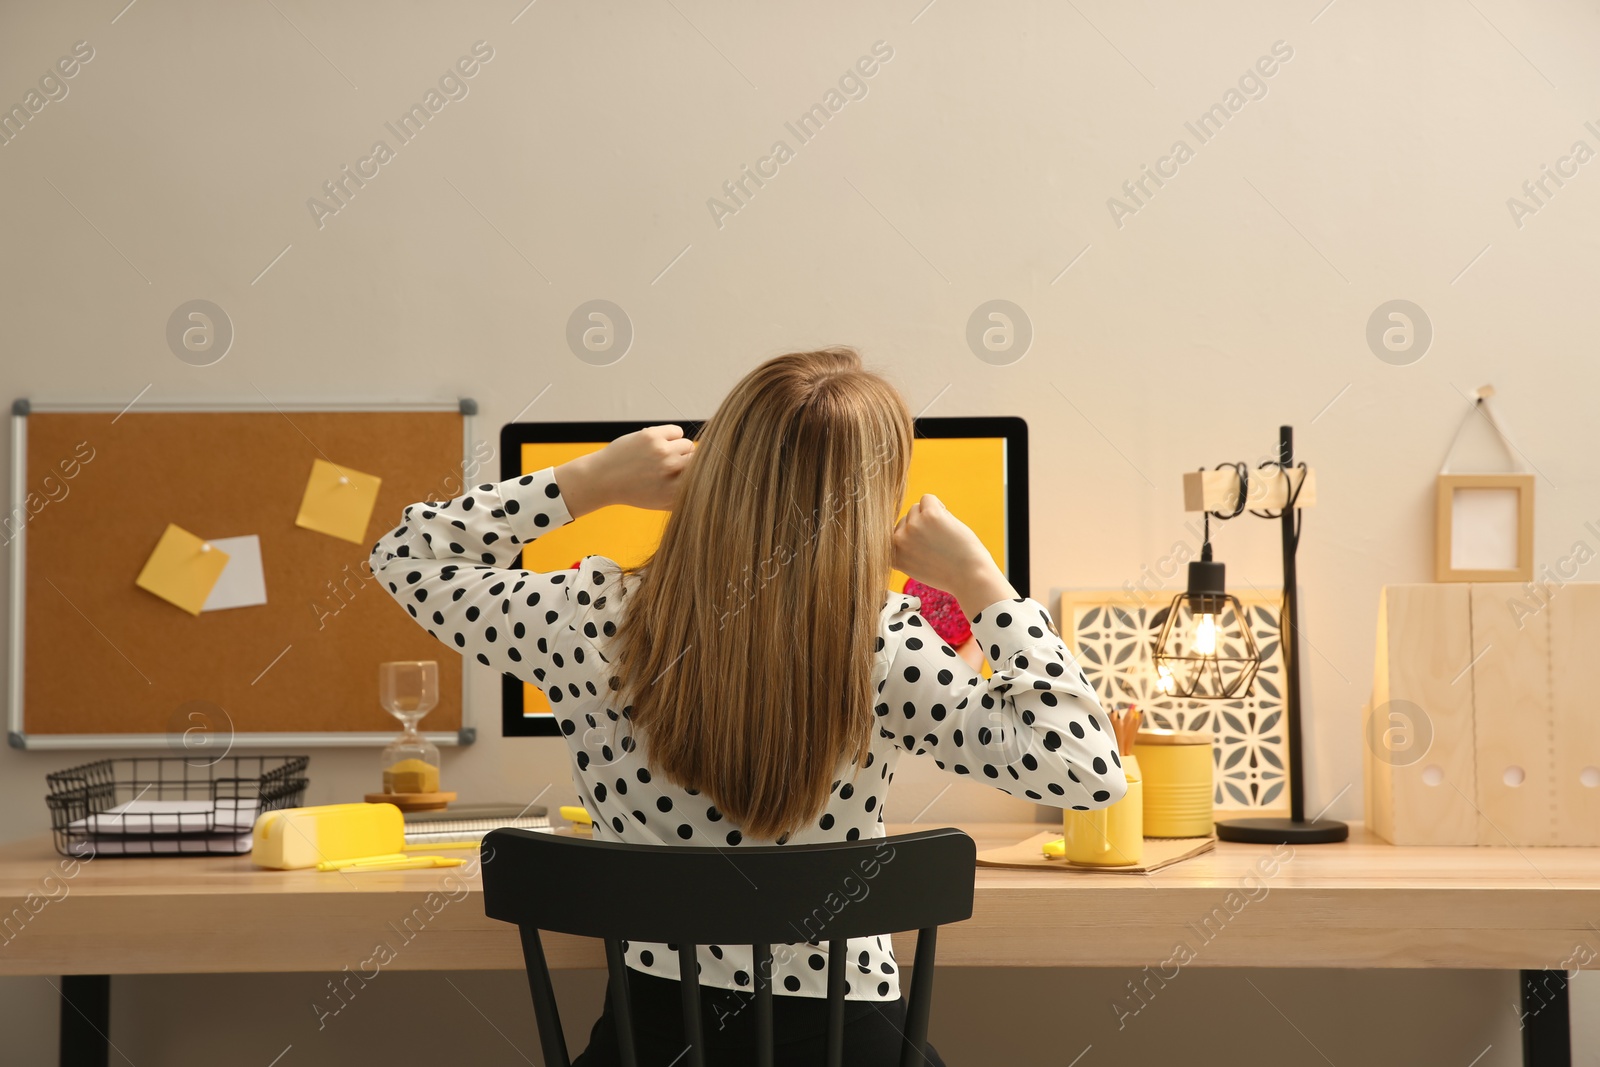 Photo of Woman sitting at wooden desk with computer near light wall, back view. Interior design